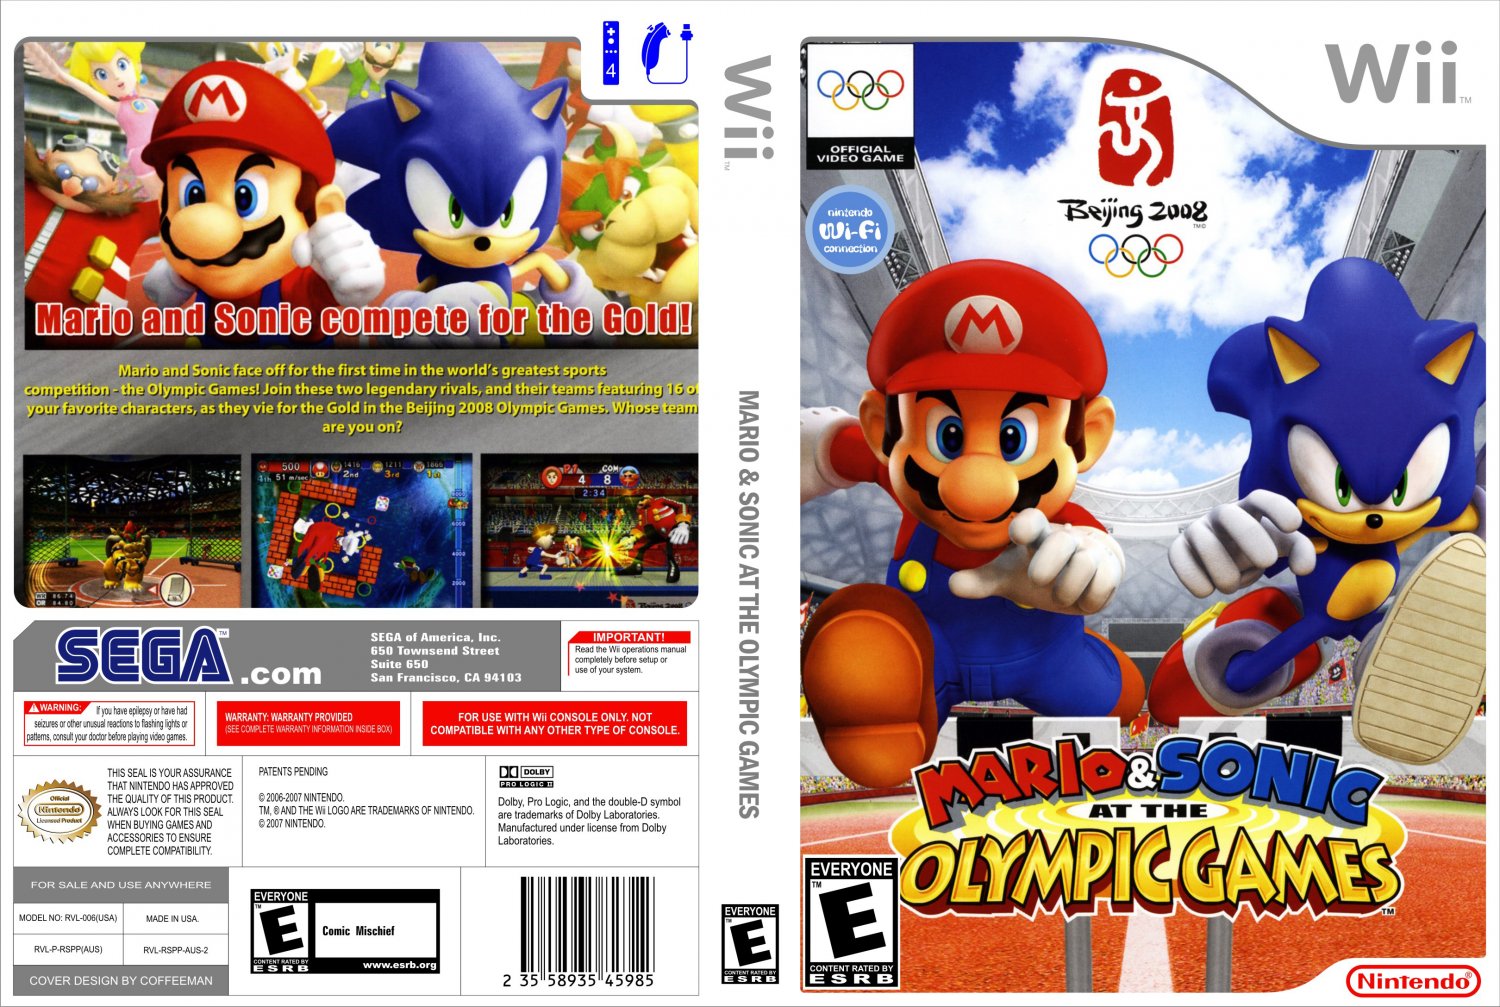 mario-sonic-at-the-olympic-games-nintendo-wii-game-covers-mario